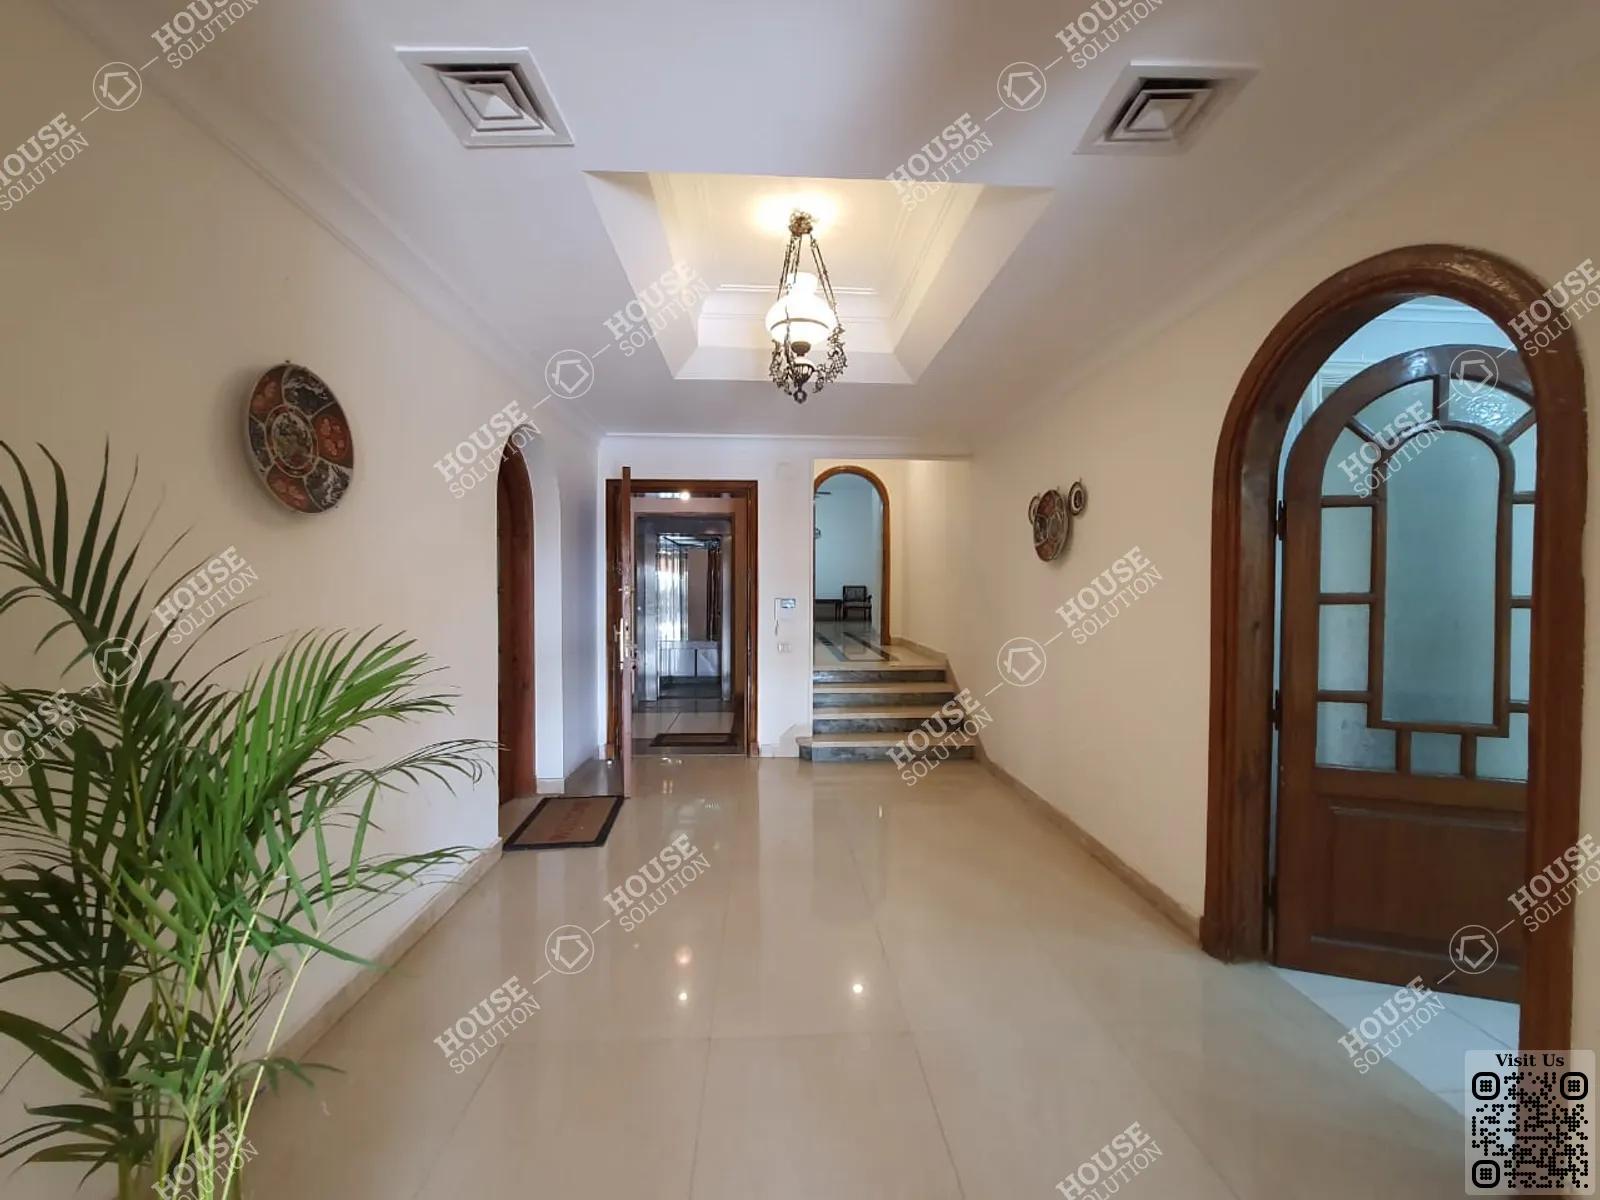 RECEPTION  @ Apartments For Rent In Maadi Maadi Degla Area: 400 m² consists of 4 Bedrooms 4 Bathrooms Furnished 5 stars #5154-2